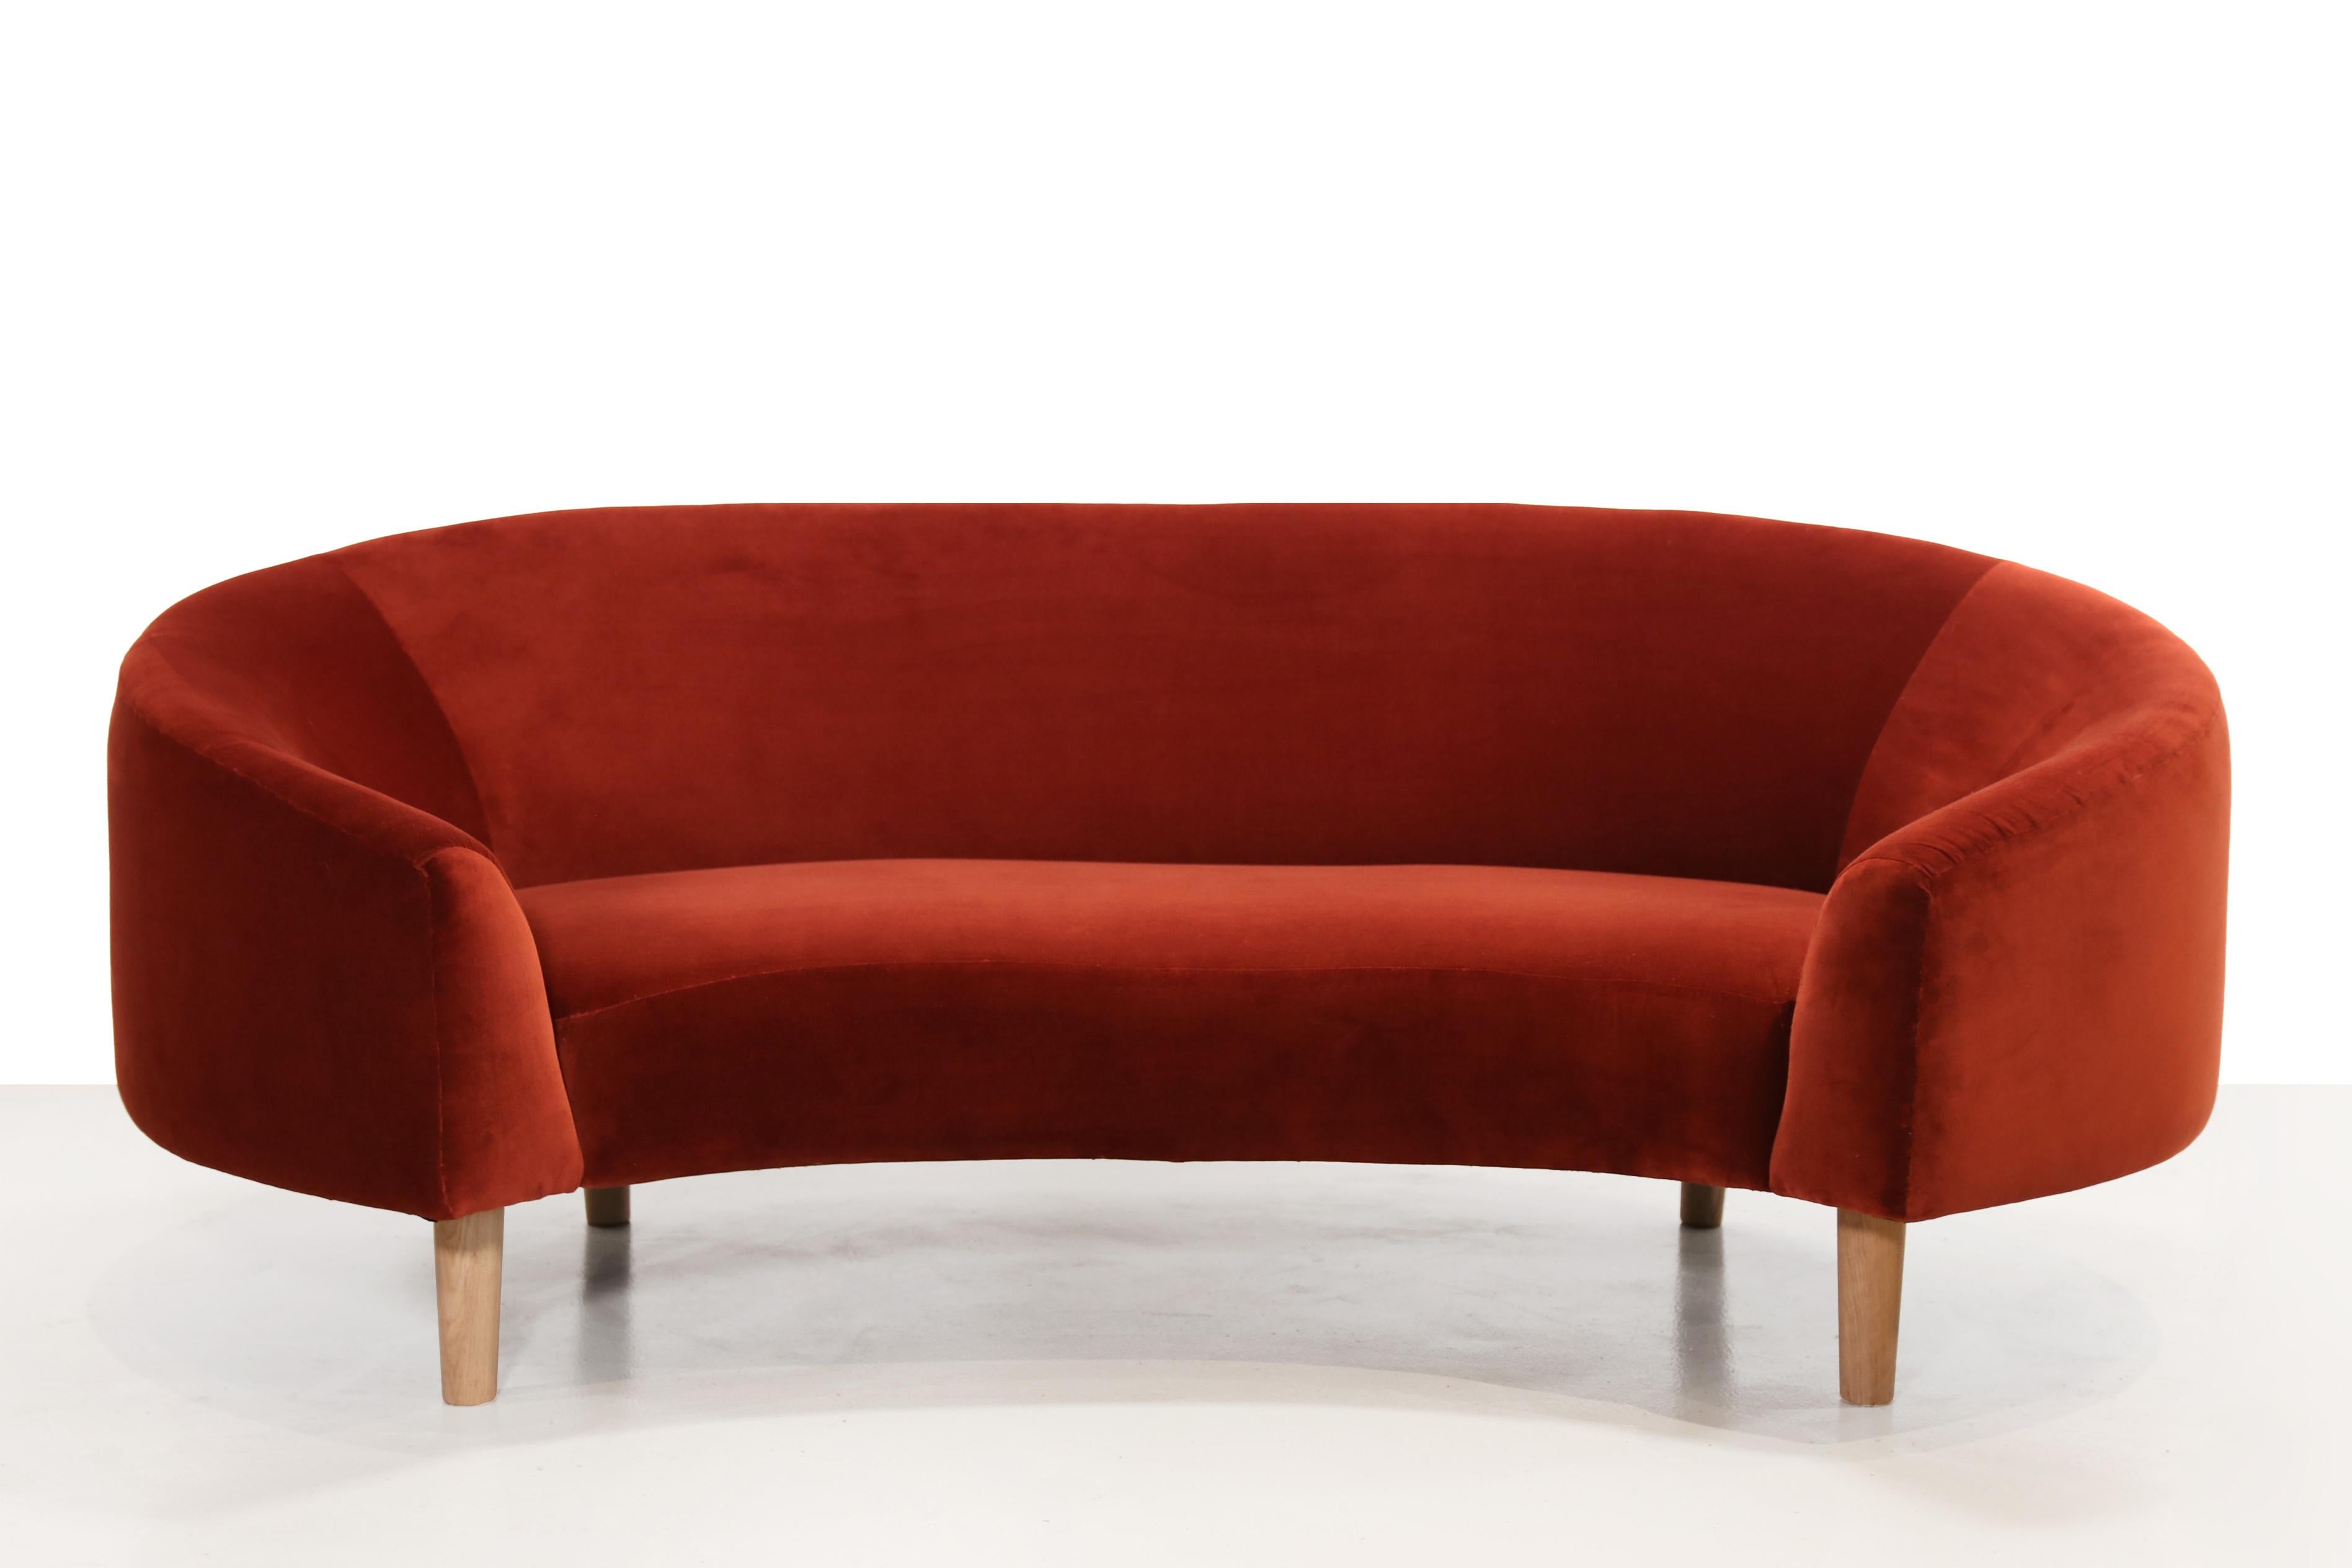 This unique vintage bench brings elegance to your interior with its beautiful round shapes. It is not only a piece of seating furniture, but also a work of art in itself. The curved shape reminds us a bit of a croissant or a crescent moon. This